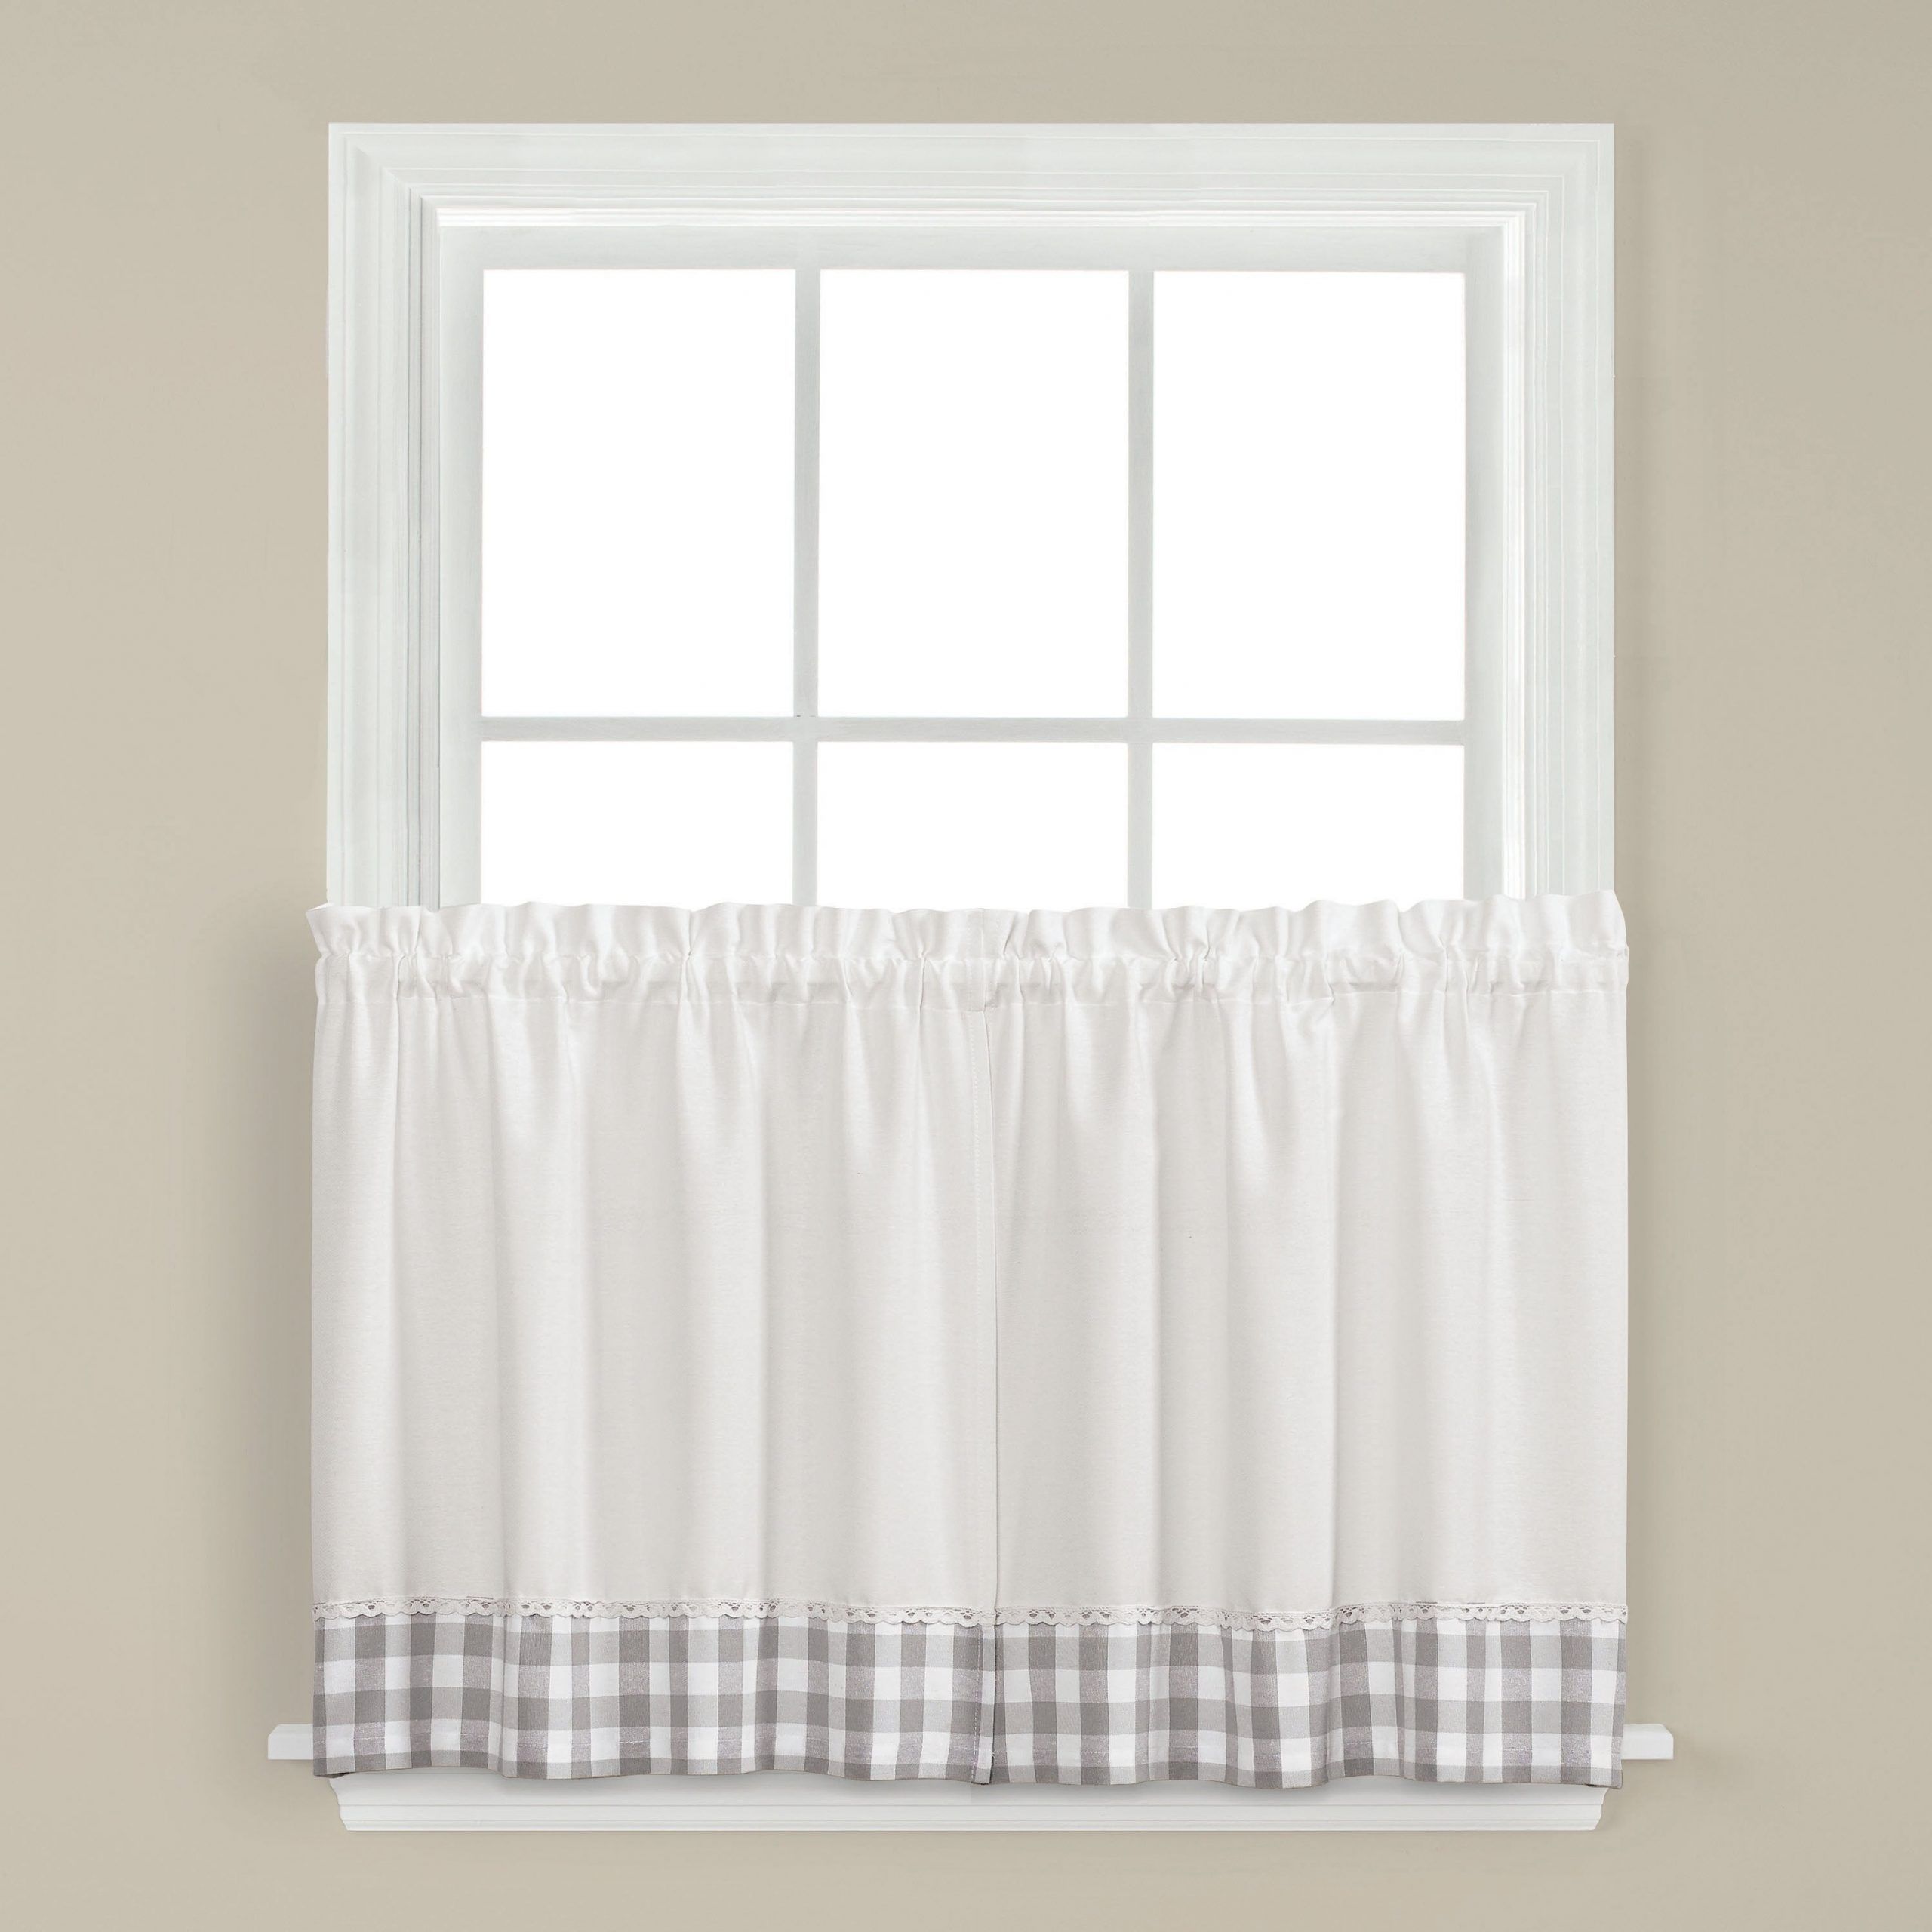 Skl Home Cumberland 36 Inch Tier Pair In Dove Gray Within Dove Gray Curtain Tier Pairs (View 3 of 20)